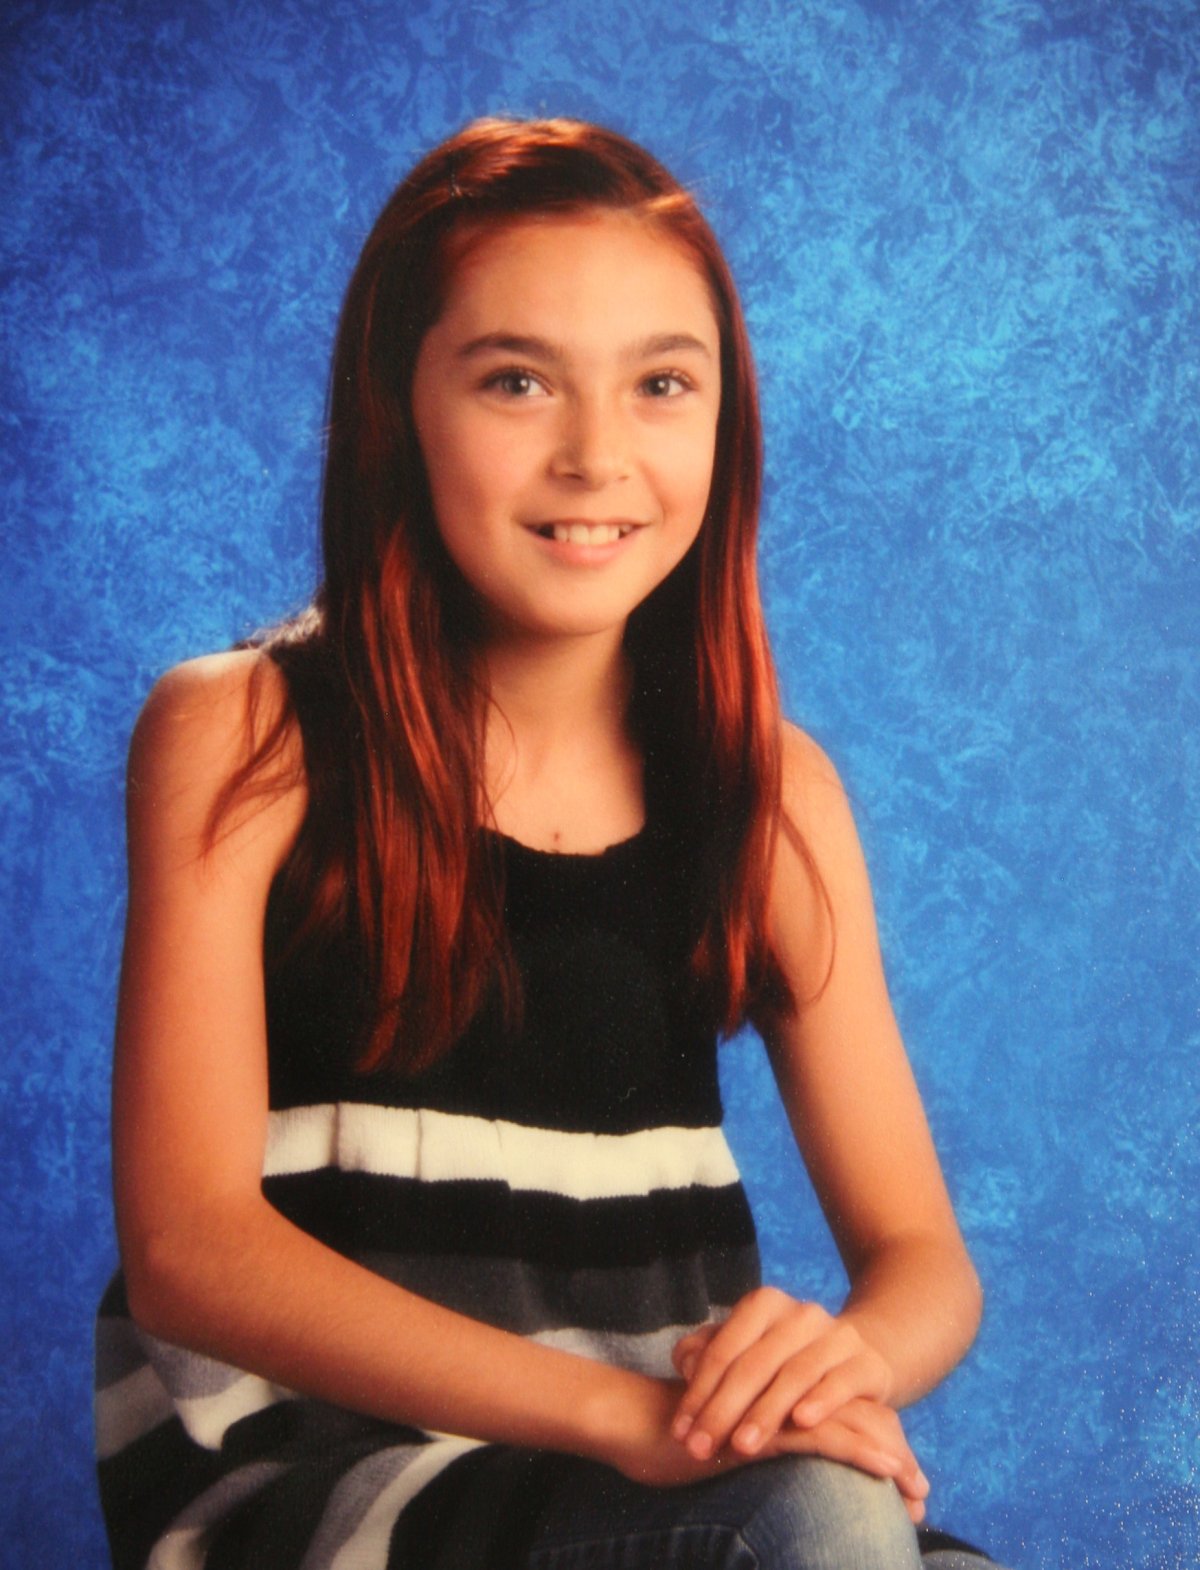 Twelve year old Sierra Dubois is missing, and police are asking you to be on the lookout for her.